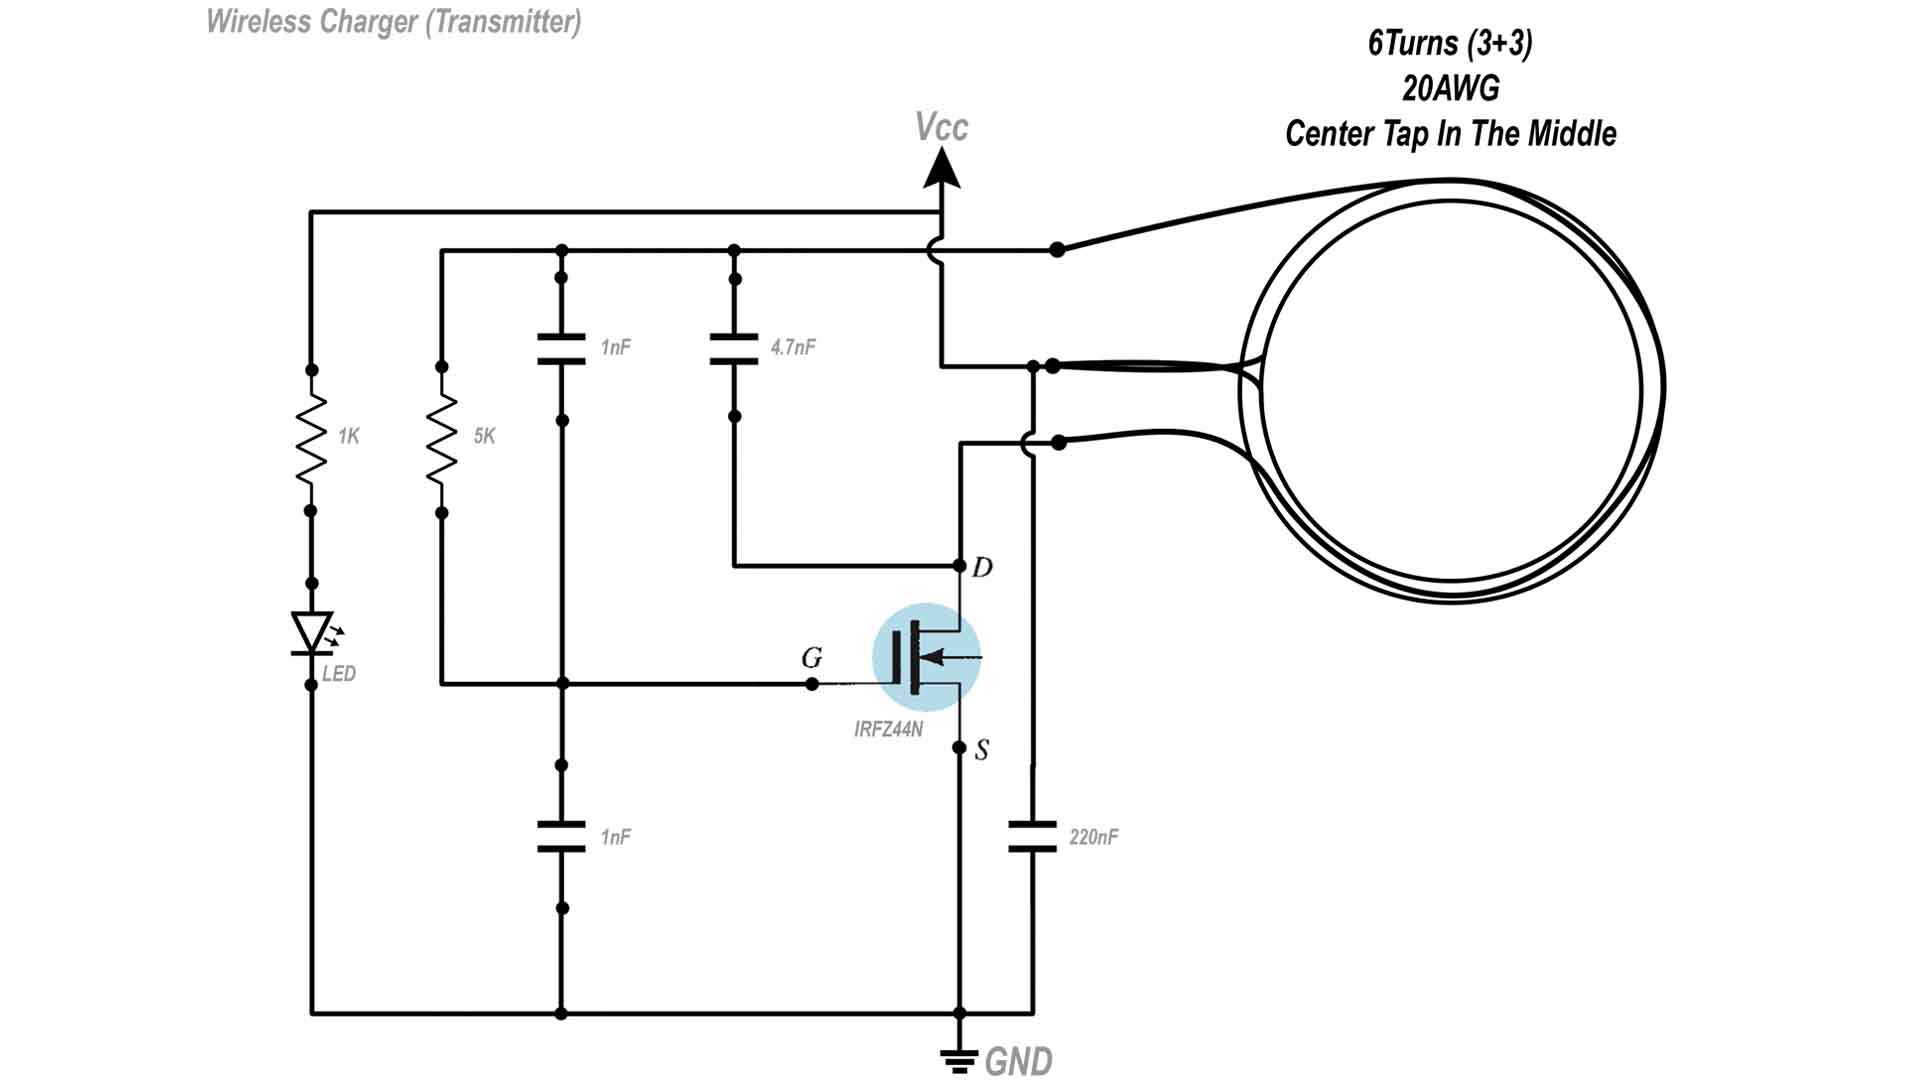 wireless charger transmitter schematic